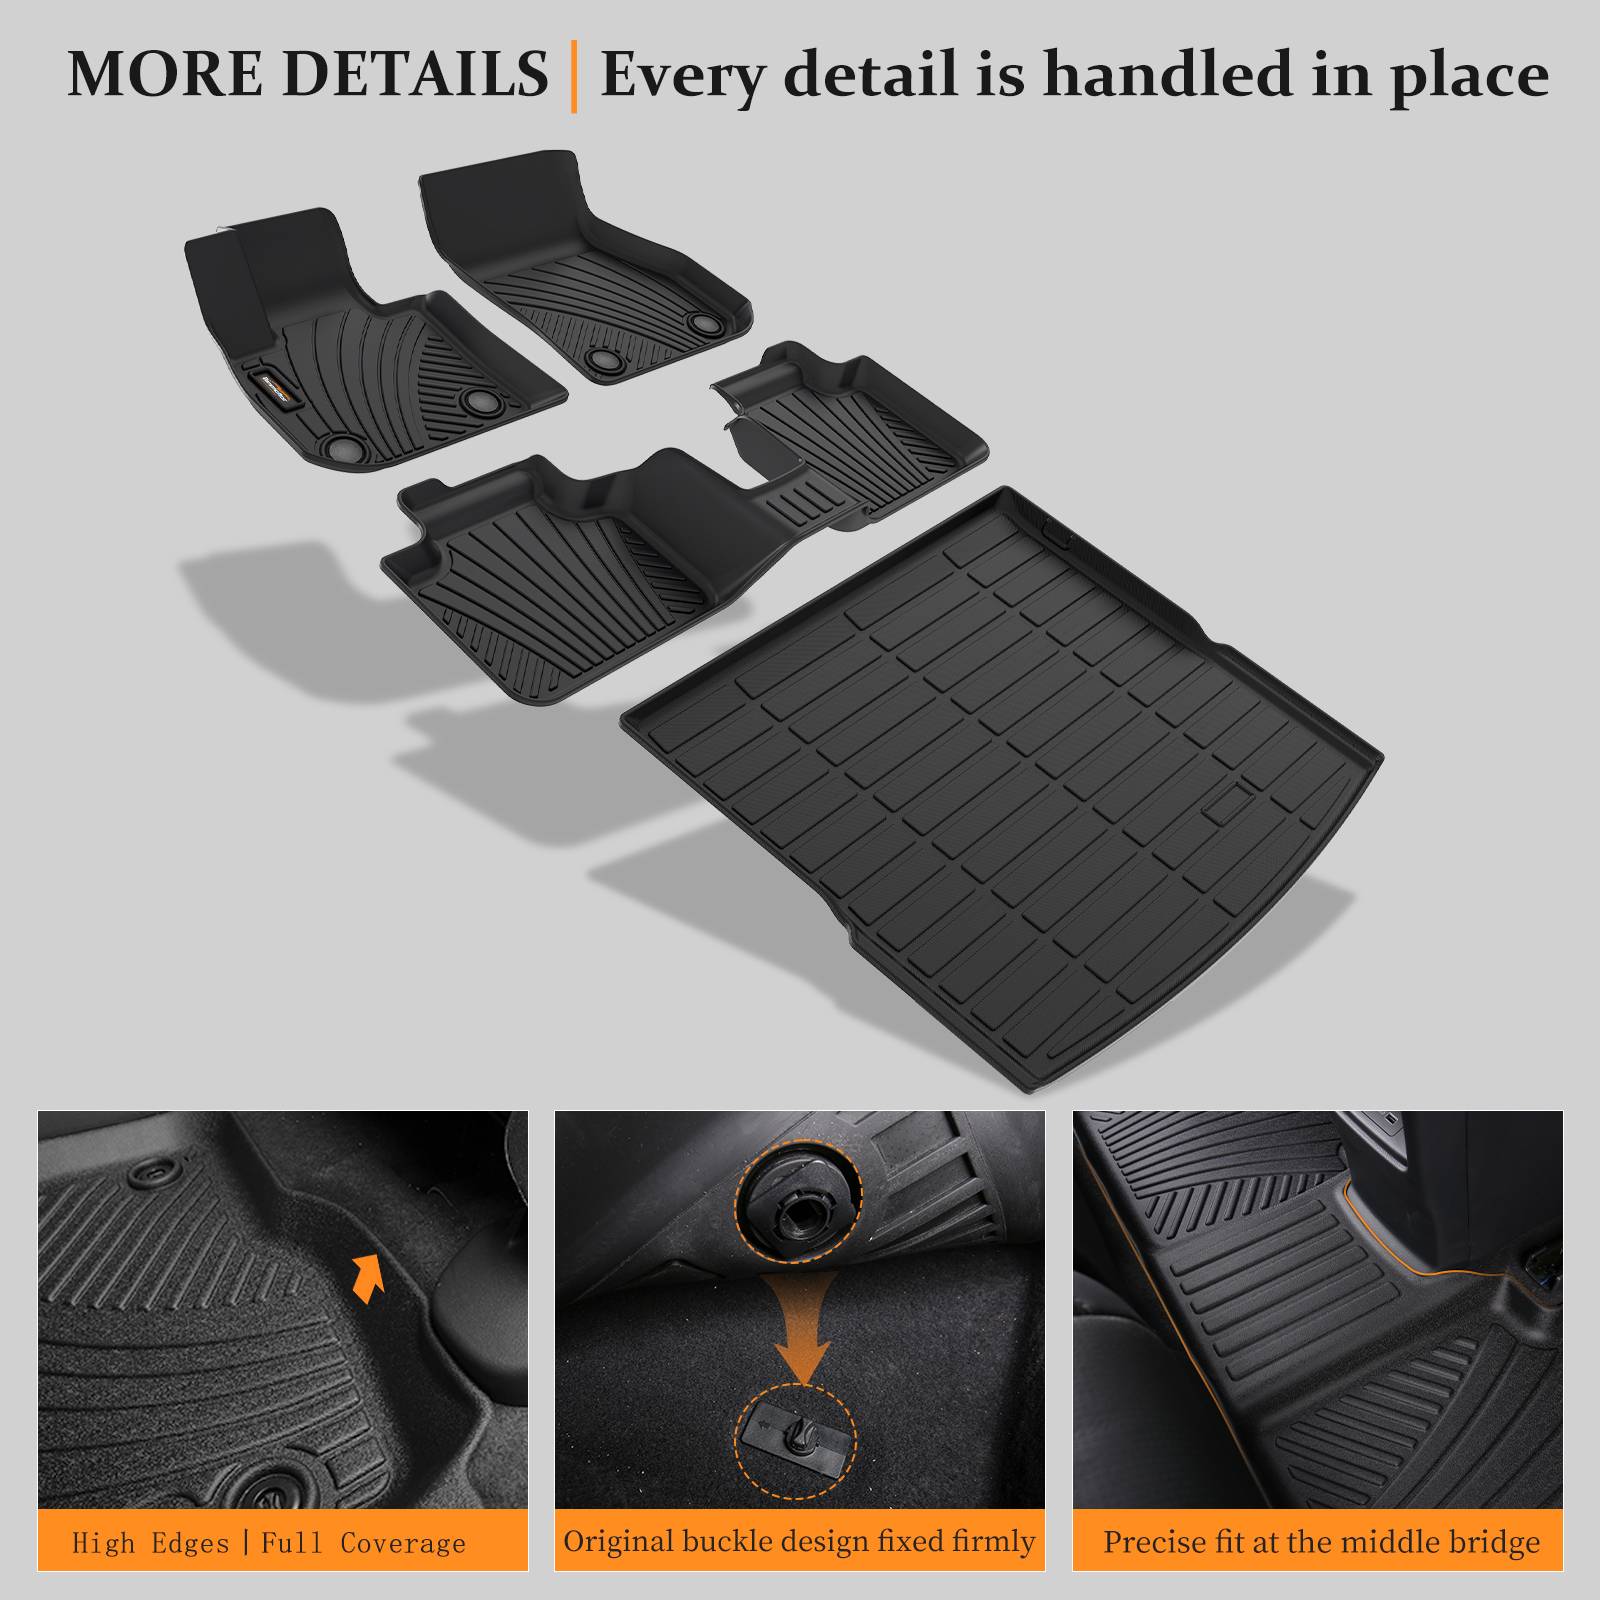 Binmotor-Floor Mats & Cargo Liner Set for Toyota Prius and Prius Prime PHEV, All Weather Protection,Waterproof Car Mats（compatible year 2023-2024）